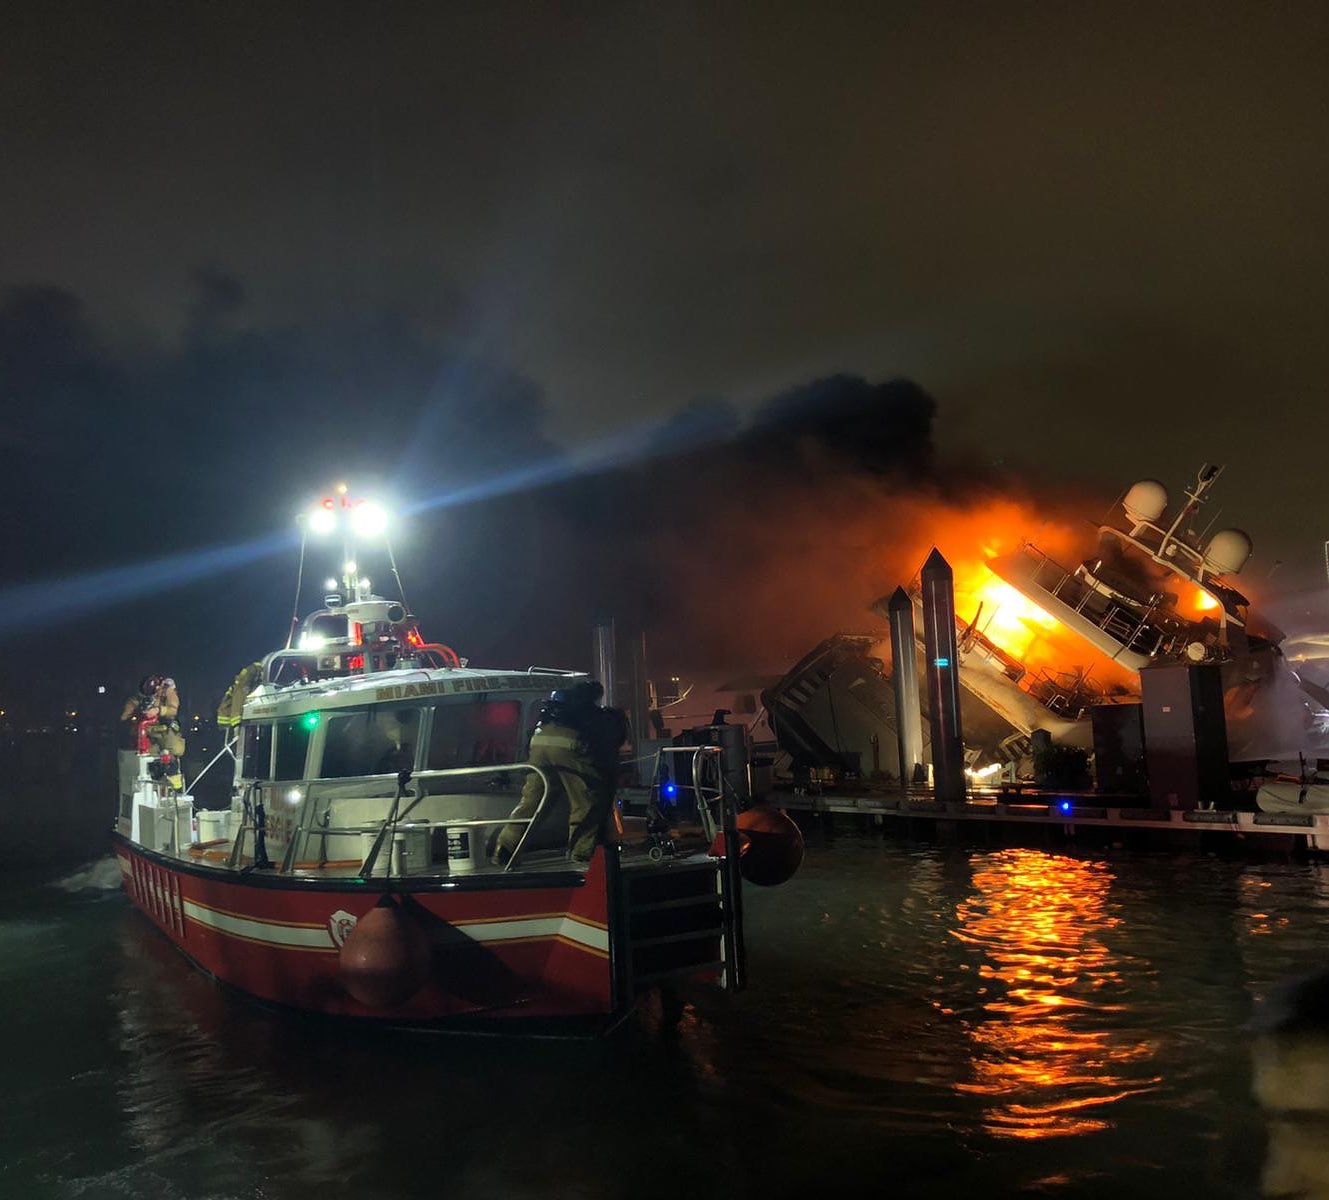 USCG launches pollution response for fire-stricken yacht